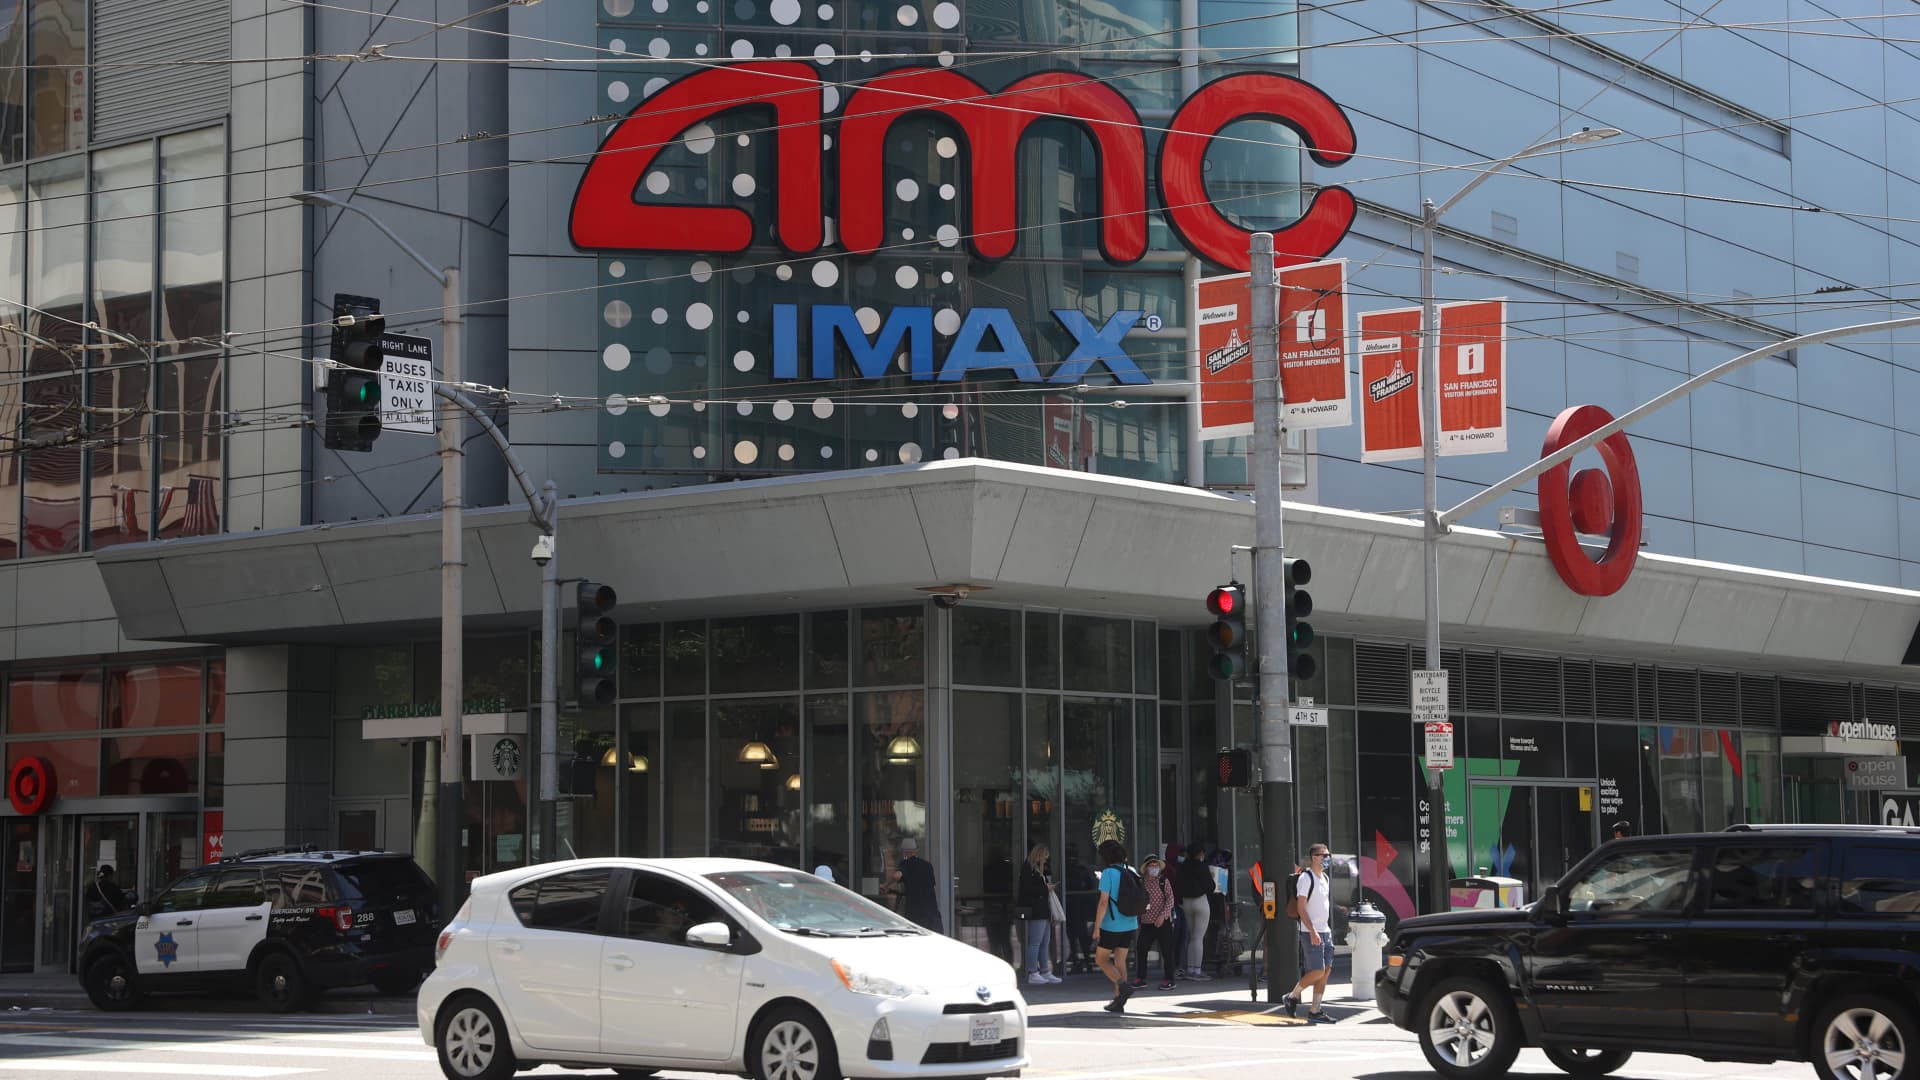 Cars drive by the AMC Metreon 16 theaters on August 10, 2021 in San Francisco, California.